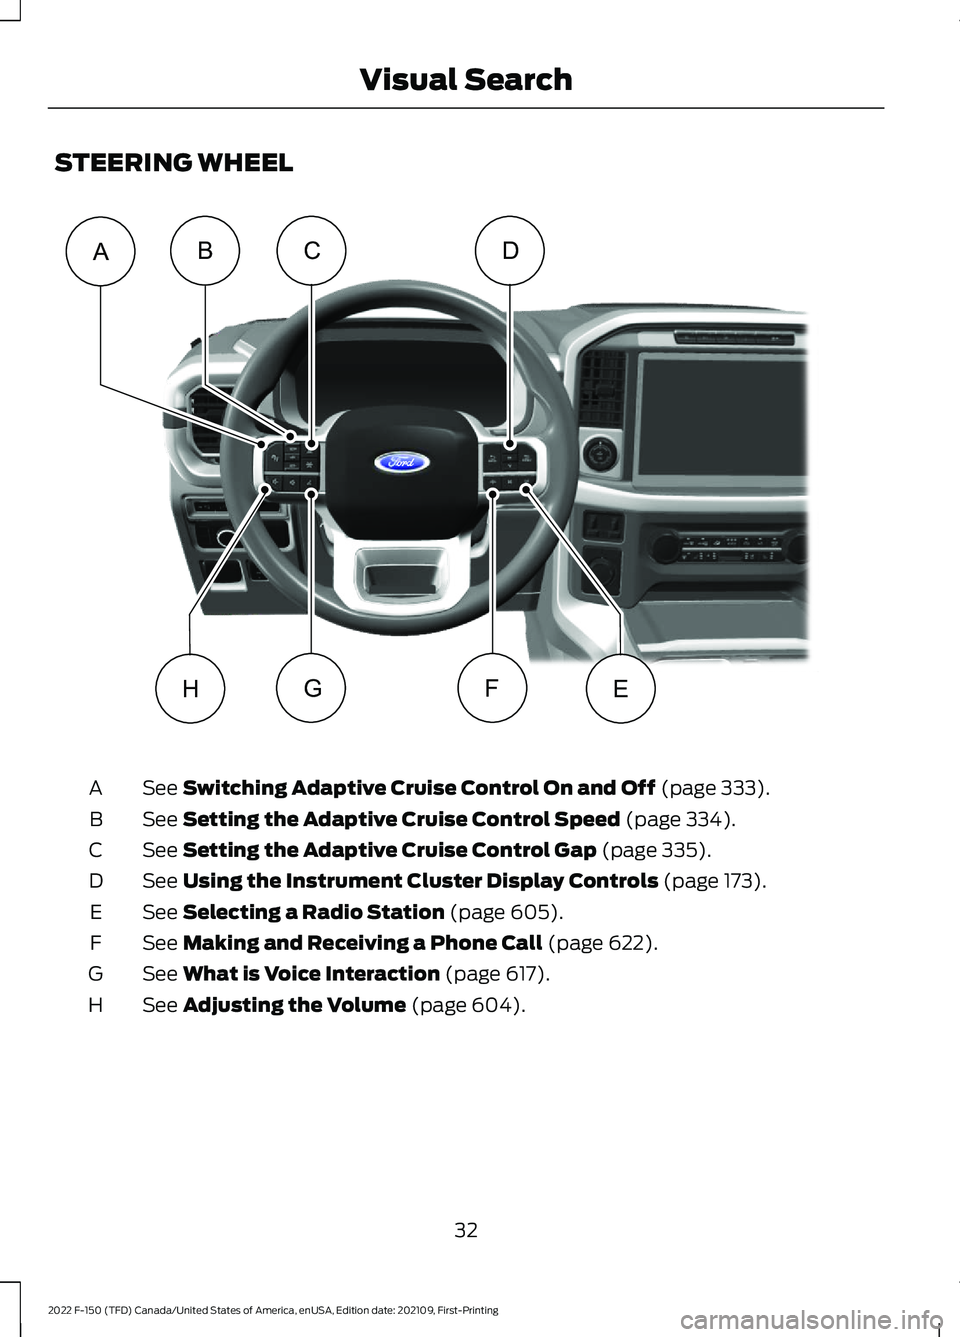 FORD F-150 2022  Owners Manual STEERING WHEEL
See Switching Adaptive Cruise Control On and Off (page 333).
A
See 
Setting the Adaptive Cruise Control Speed (page 334).
B
See 
Setting the Adaptive Cruise Control Gap (page 335).
C
Se